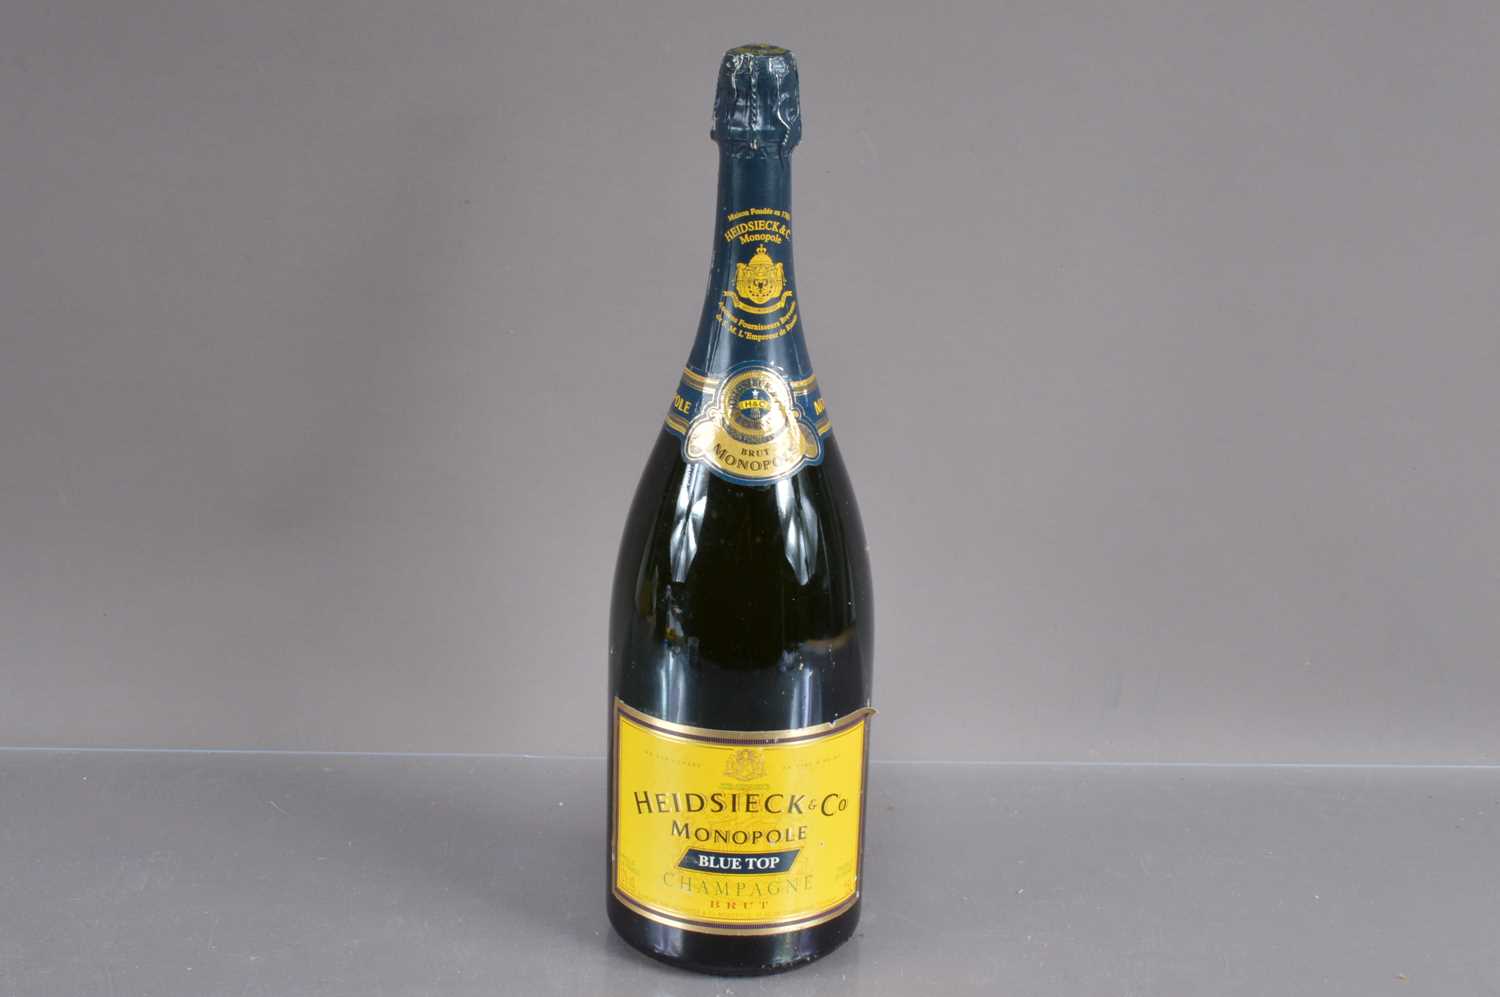 Lot 84 - One magnum of Heidsieck Monopole Blue Top Champagne